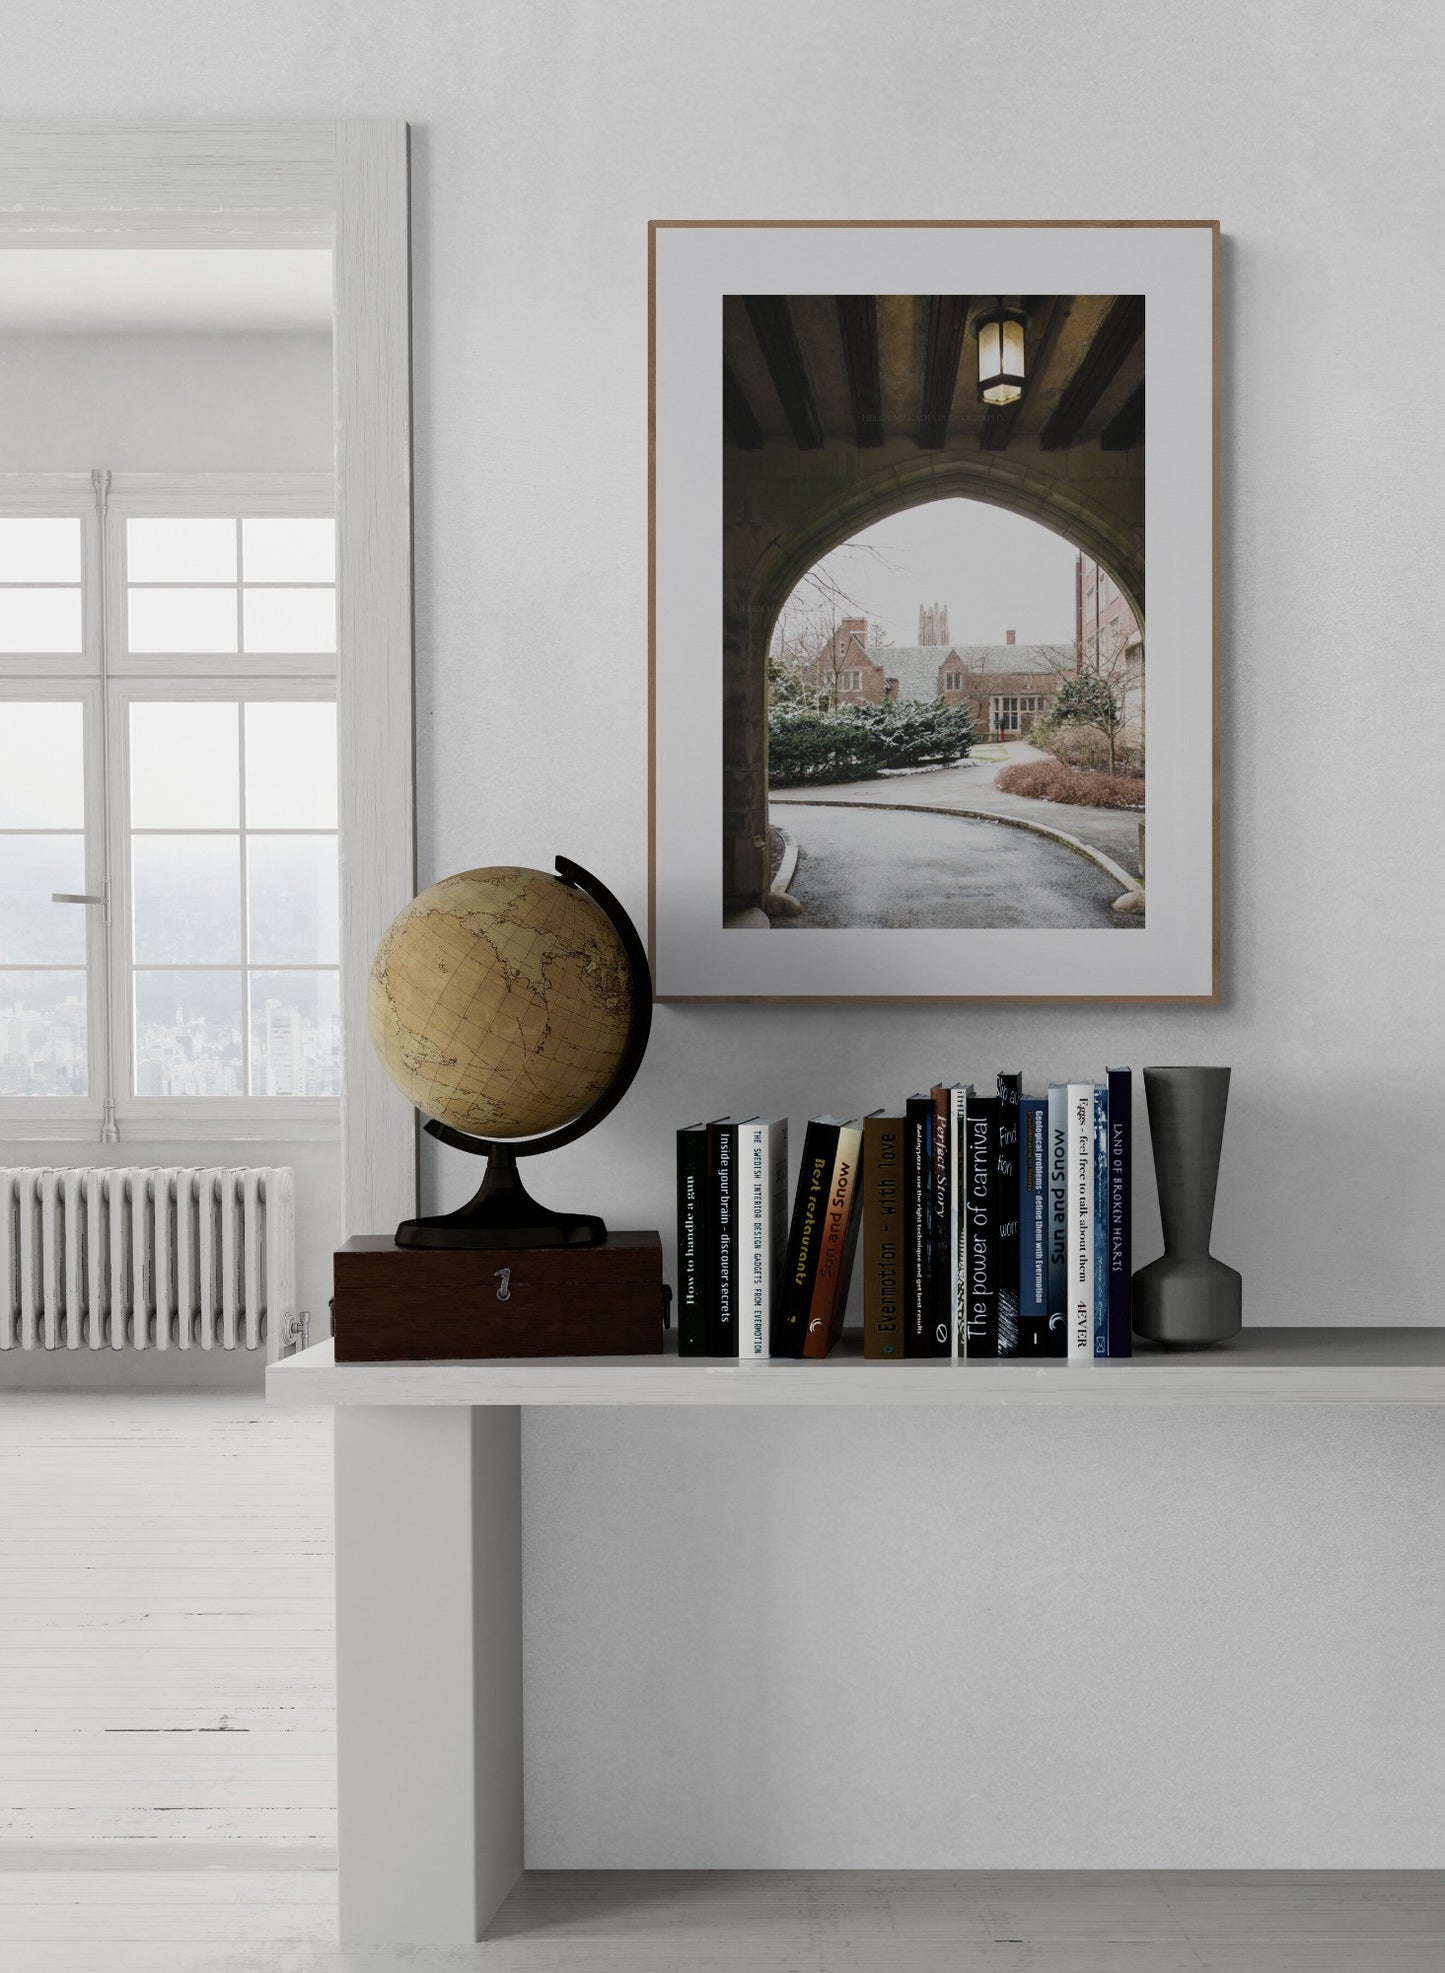 Wellesley College Photograph as Wall Art in a Home Office